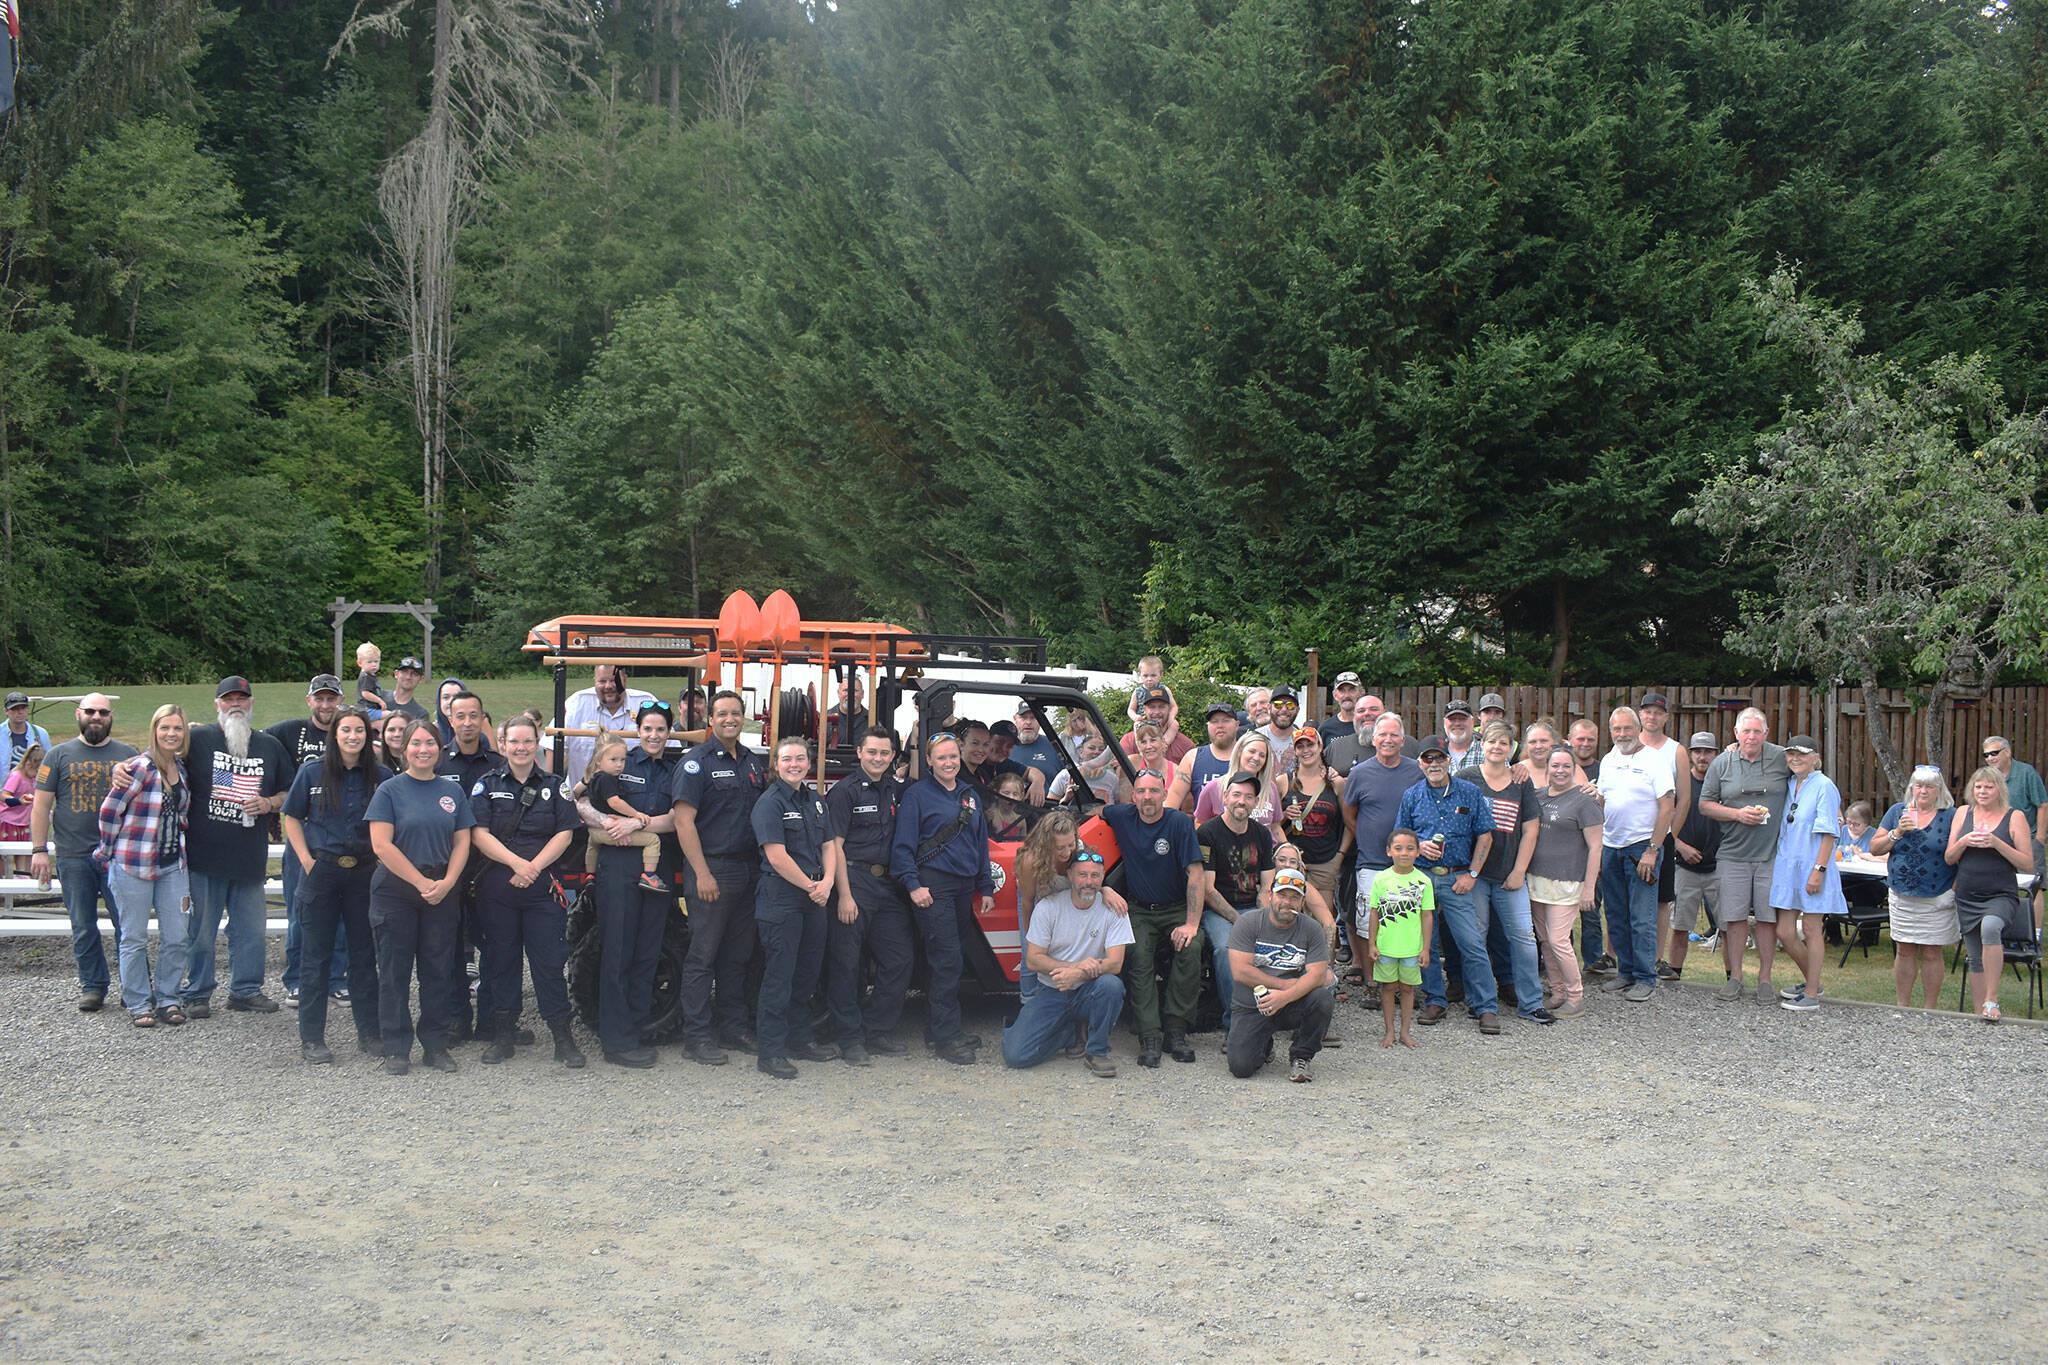 Members of the Buckley Fire Department and Wilkeson community pose for a group photo with the new side-by-side.